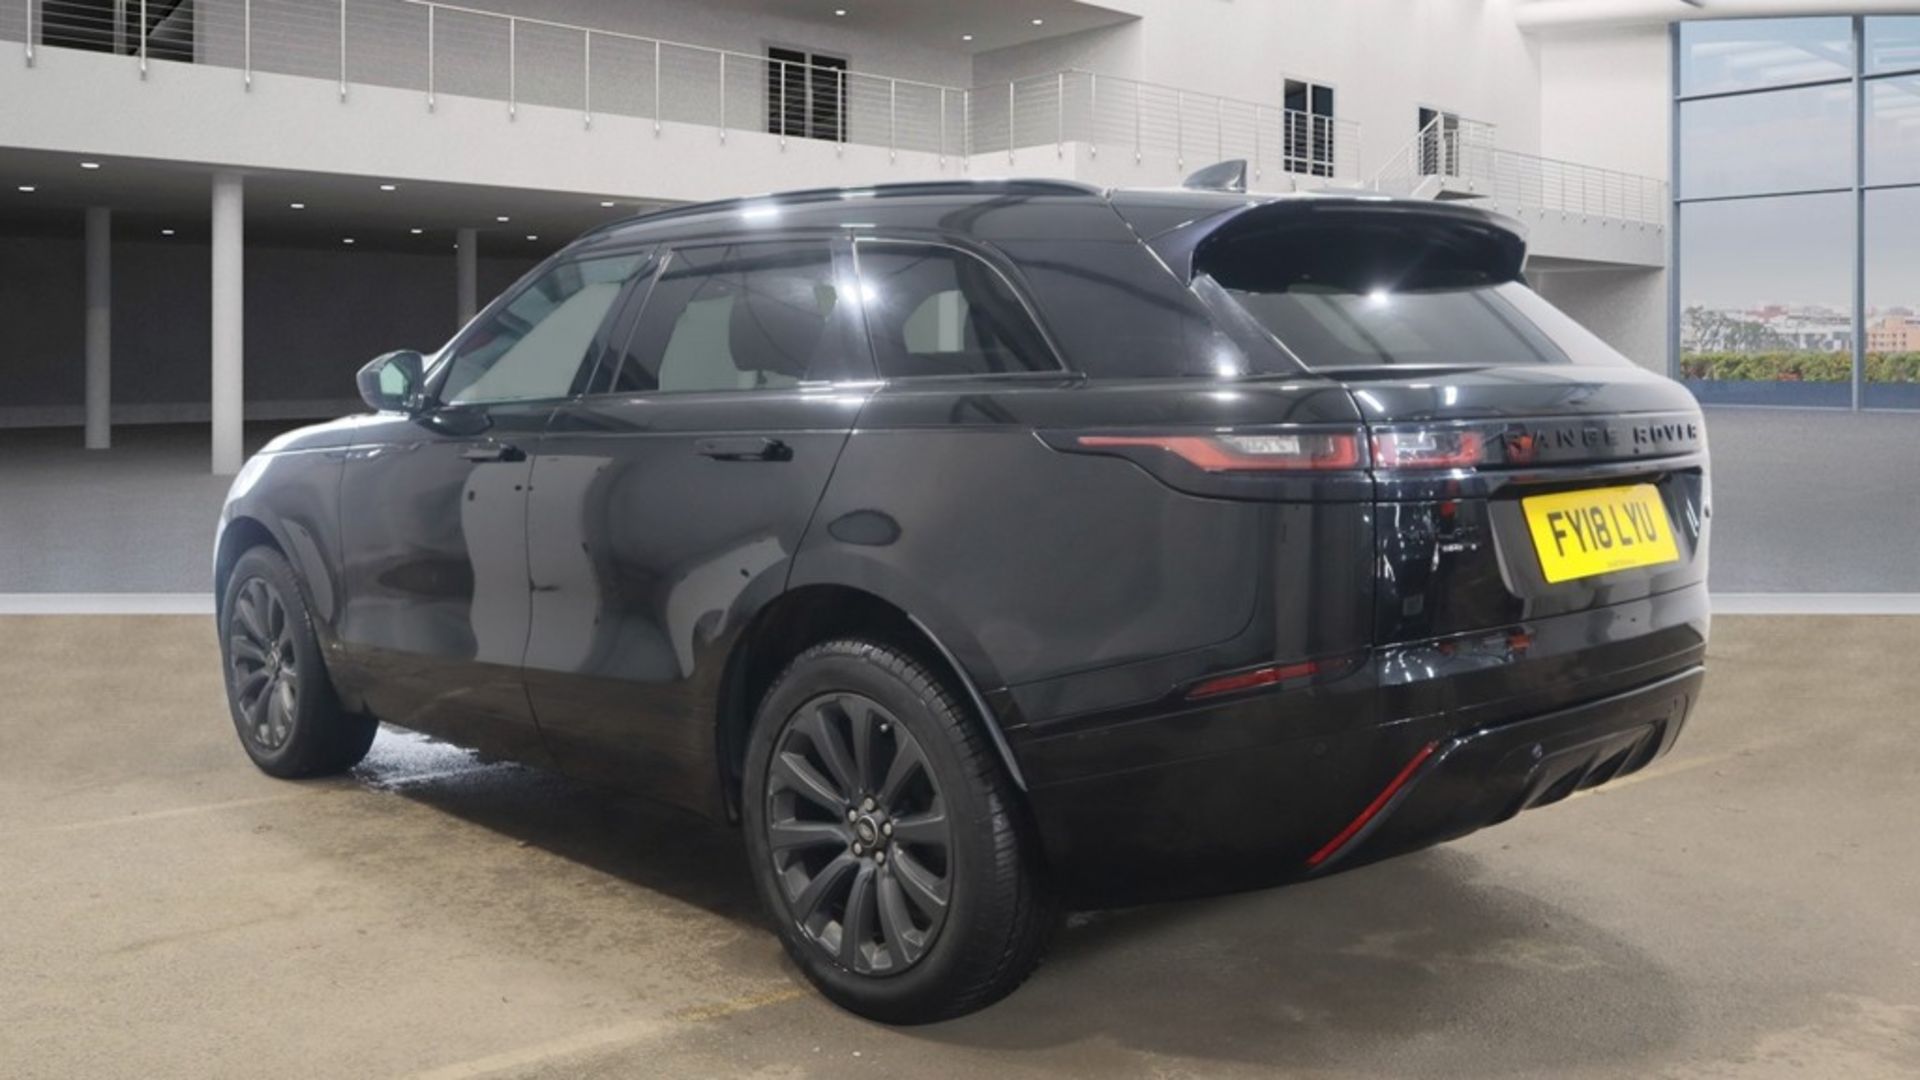 ** ON SALE ** Land Rover Range Rover Velar 2.0 D240 R-Dynamic S 2018 '18 Reg' 4WD - Panoramic Roof - Image 5 of 9